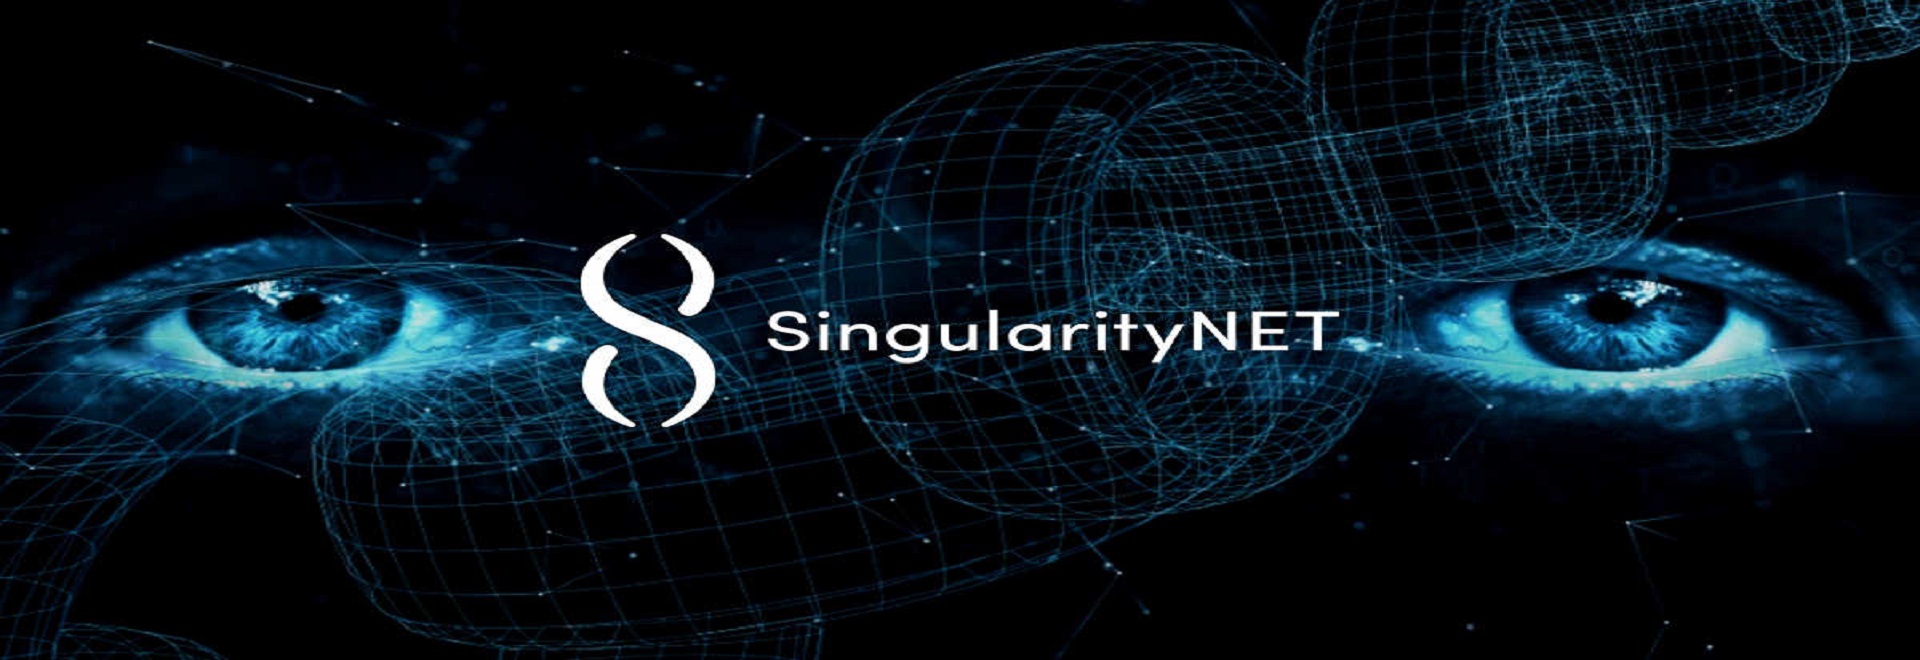 singularitynet partners with ping an altcoin buzz 75 opt - a conversation with Mark Turrell